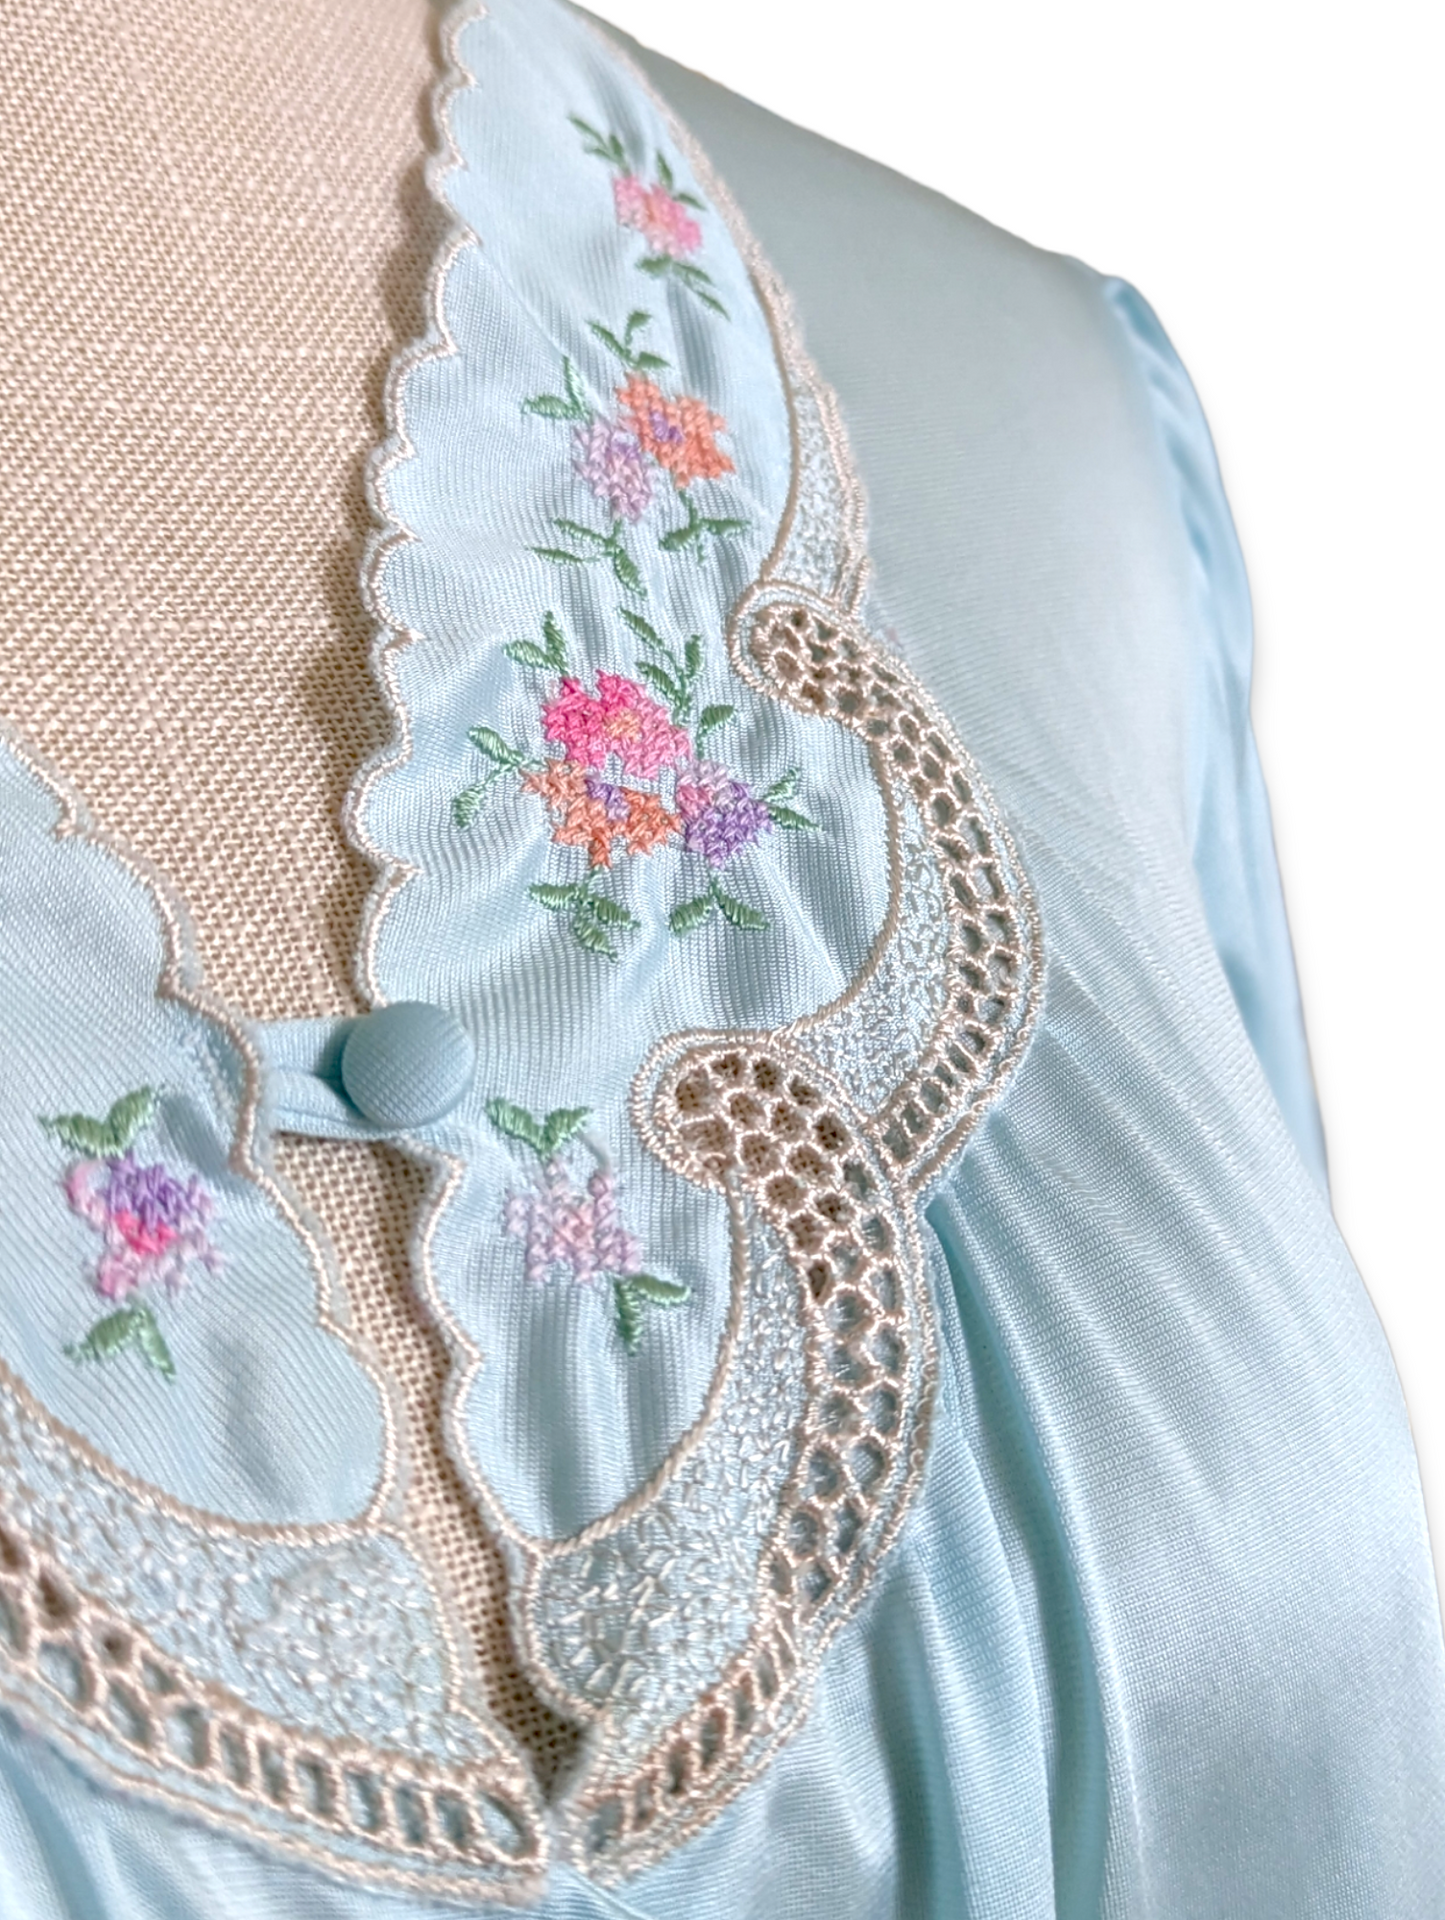 1980s Lorraine Pale Blue Embroidered Peignoir Nightgown with Floral Cross Stitch